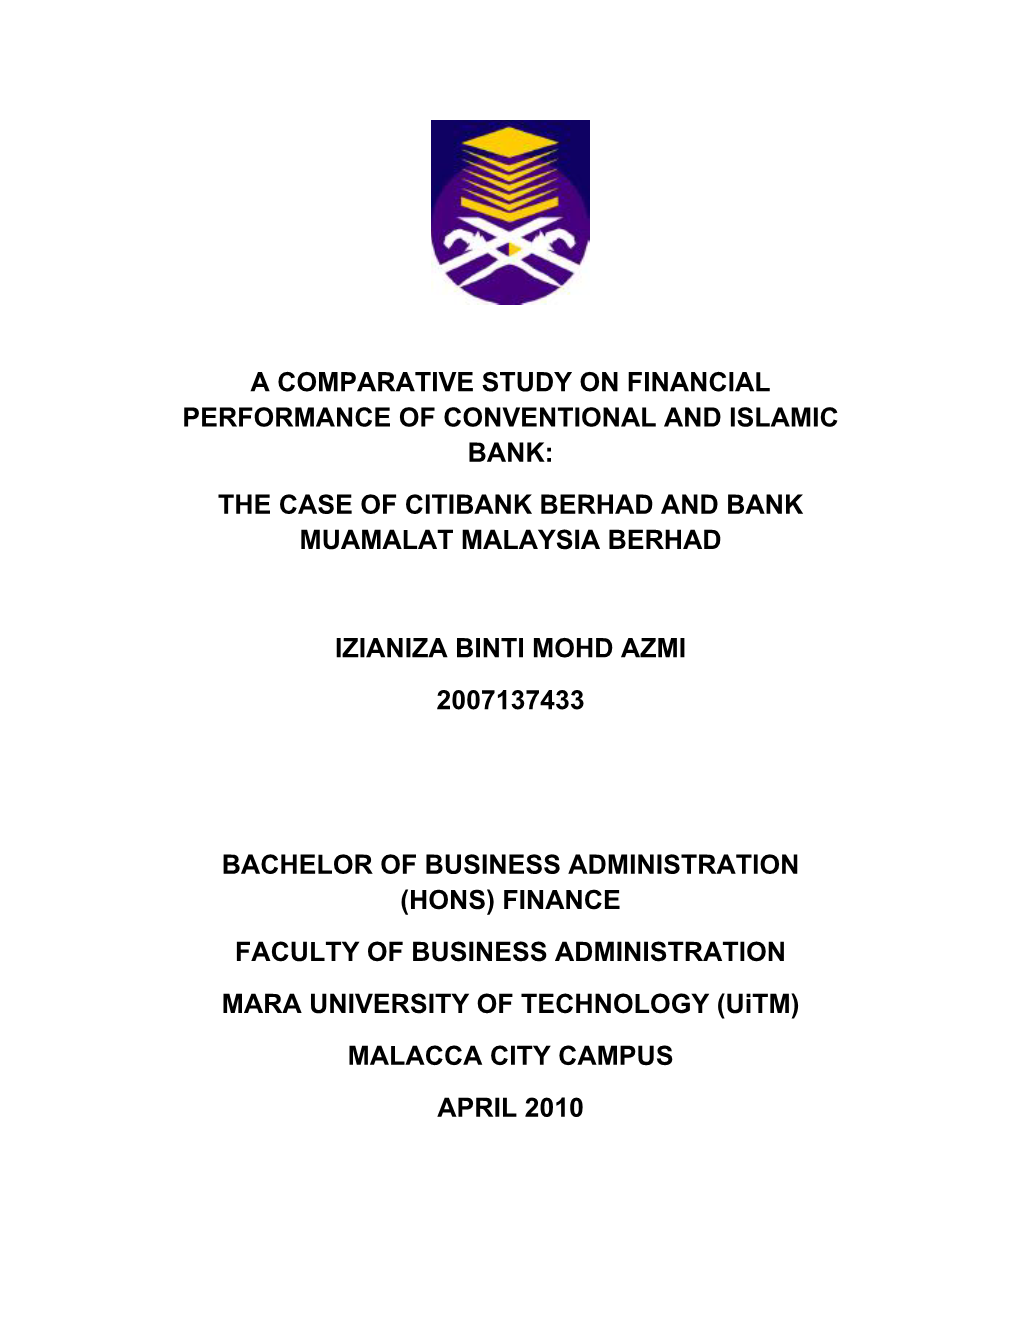 A Comparative Study on Financial Performance of Conventional and Islamic Bank: the Case of Citibank Berhad and Bank Muamalat Malaysia Berhad